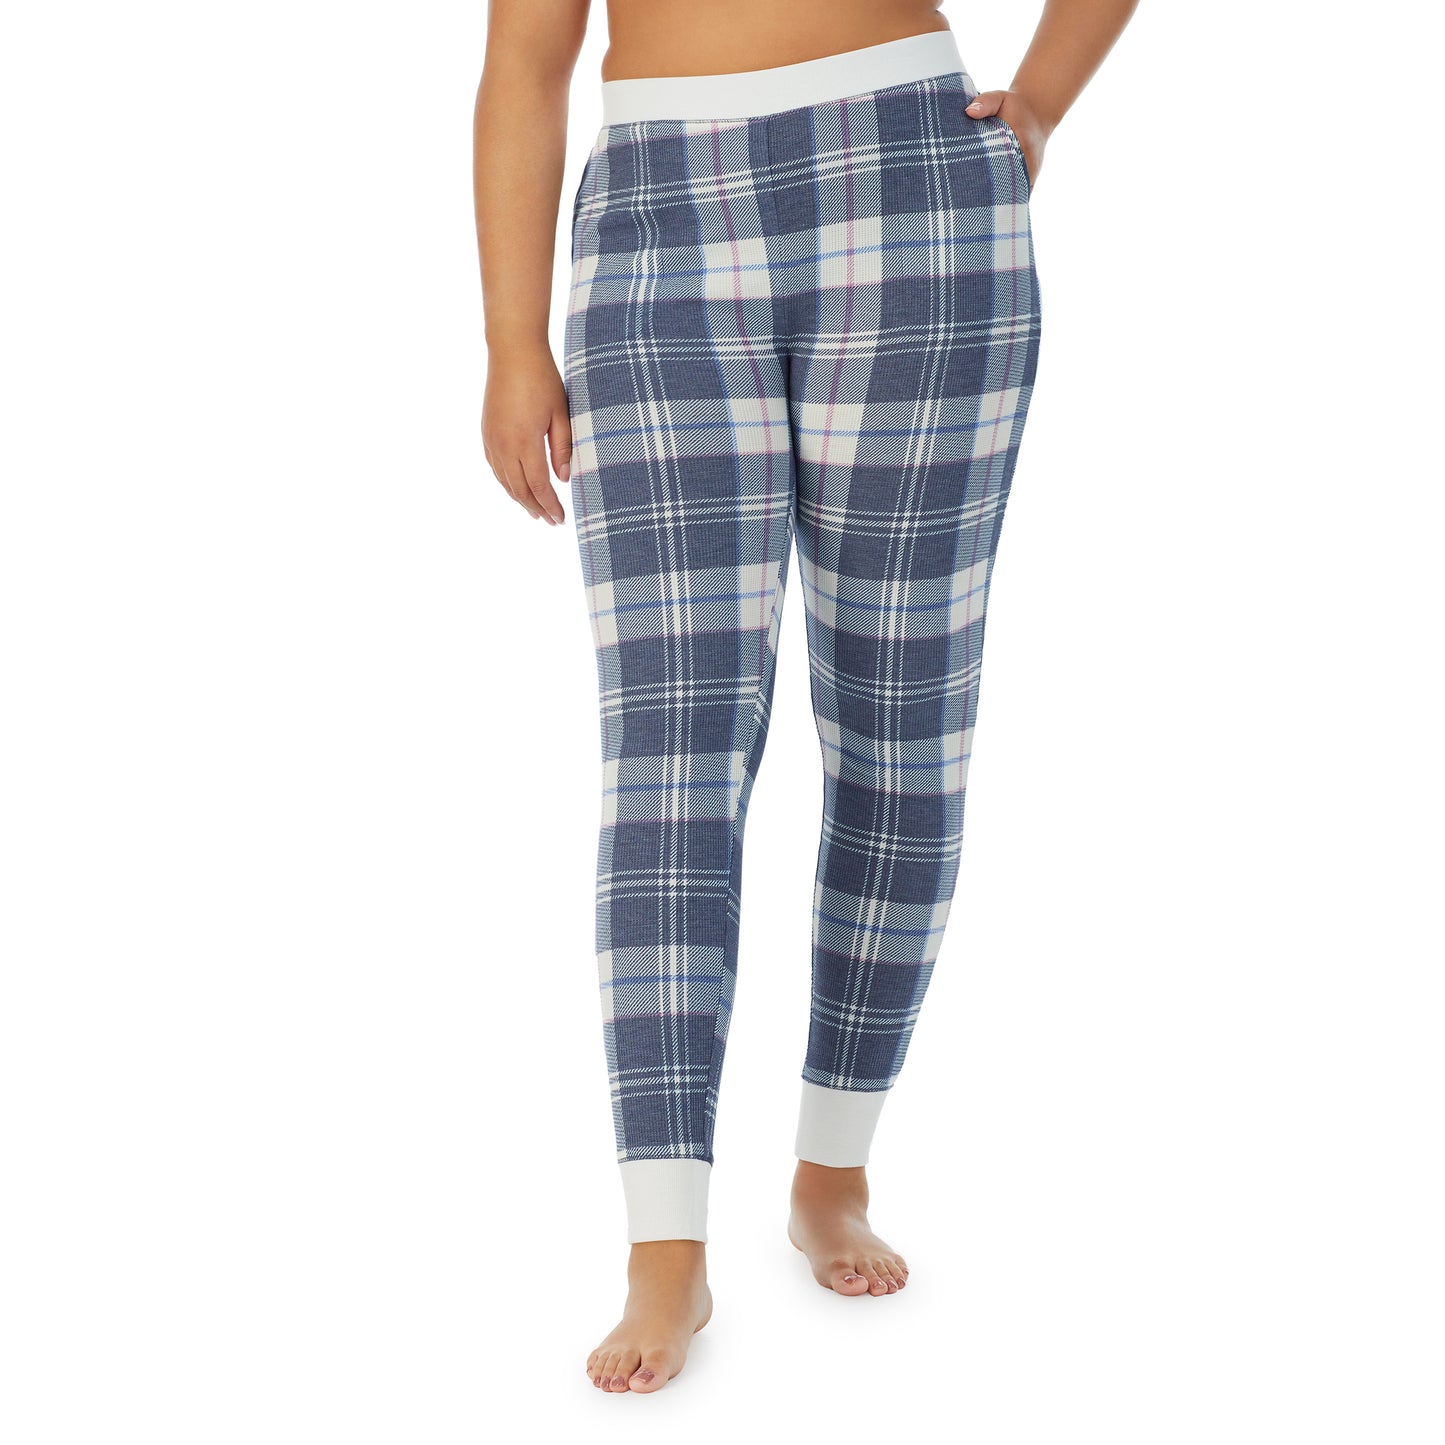 Blue Plaid;Model is wearing size 1X. She is 5’11”, Bust 36”, Waist 36.5”, Hips 47.5”. @A lady wearing a Blue Plaid legging plus.